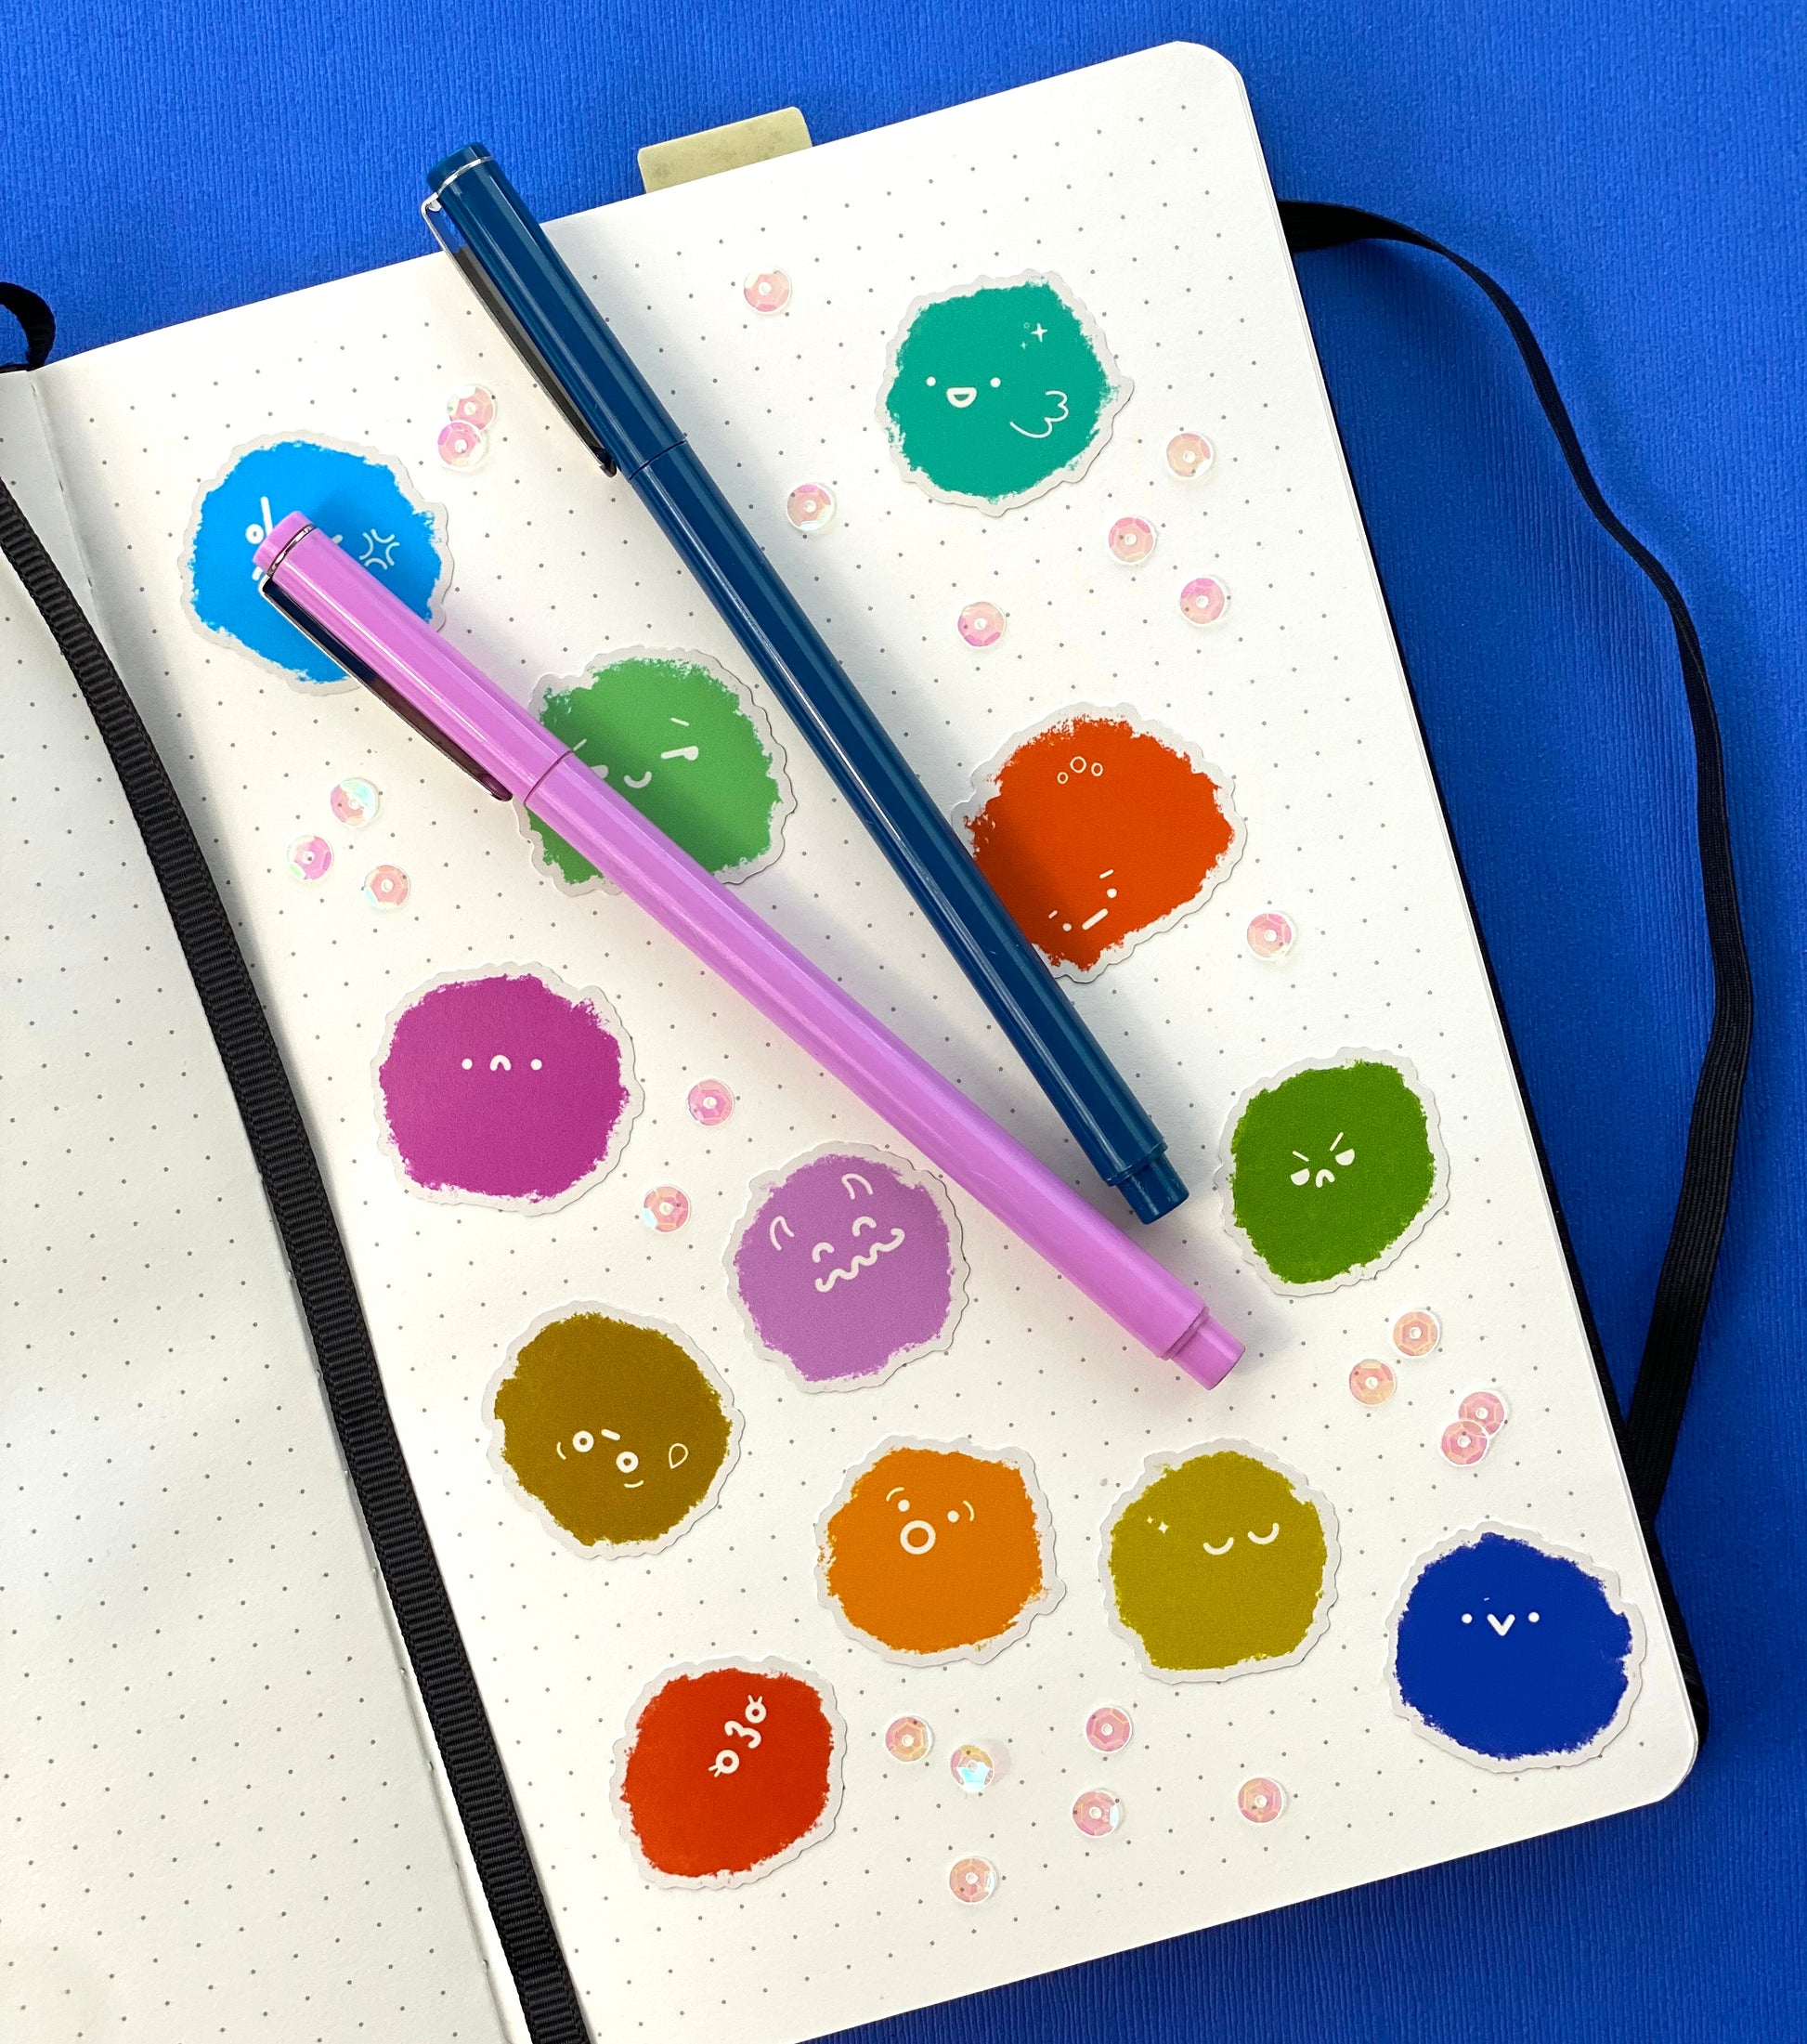 A photo of a journal page covered in sequins and stickers of 12 fuzzie textured blobs with a variety of expressions. Two pens, one blue and one pink, sit on the journal page. The journal sits on a blue background.